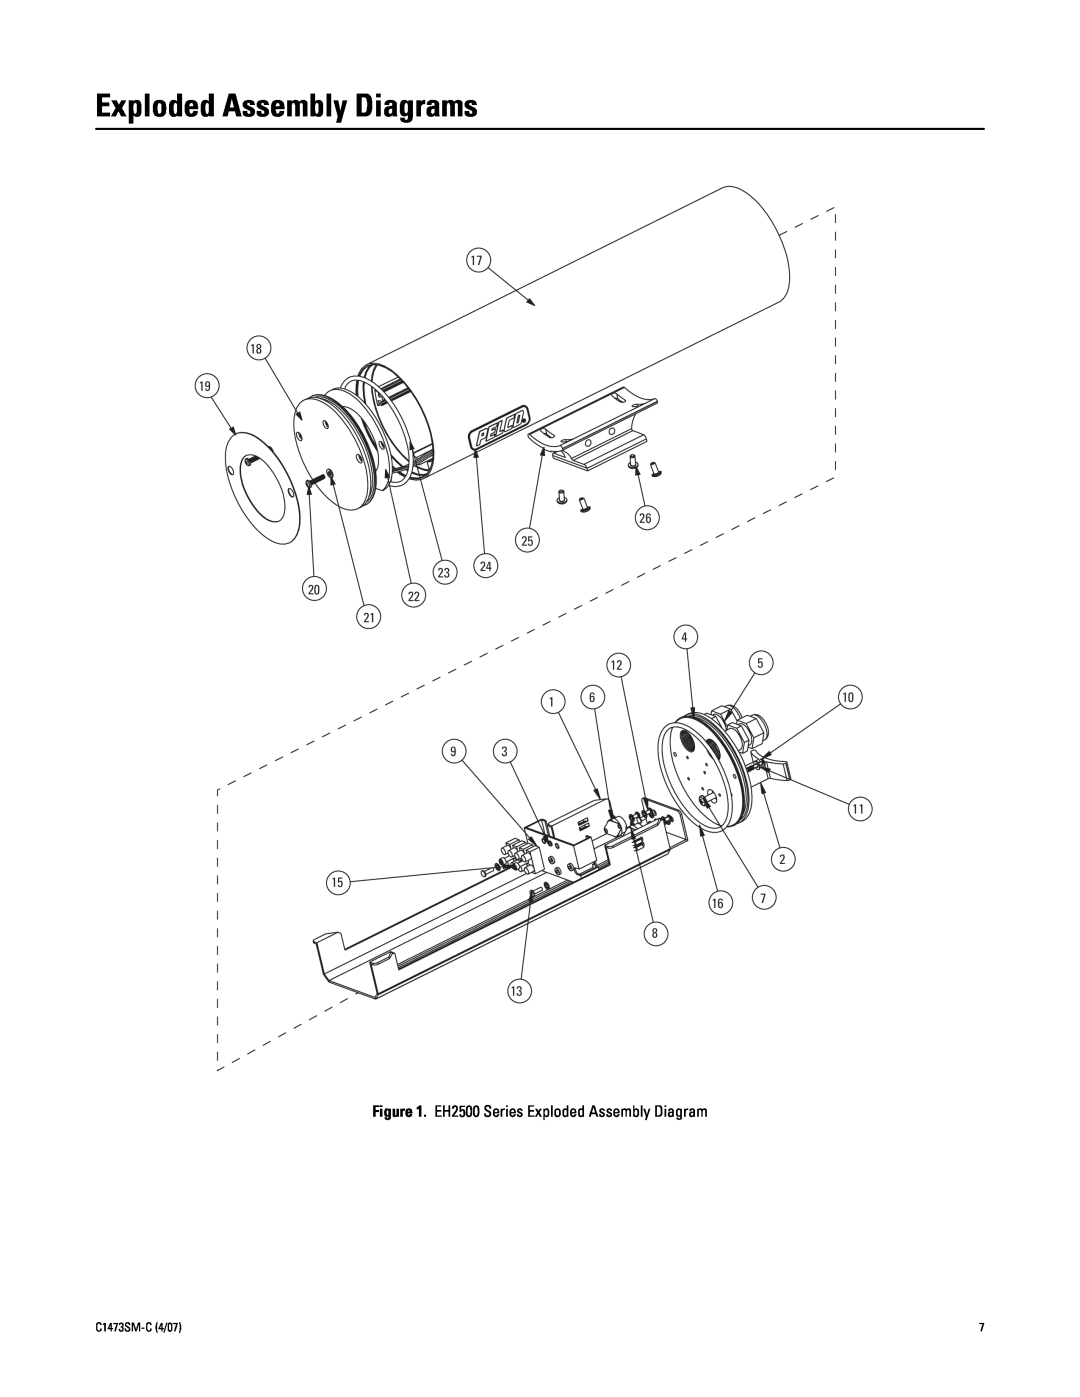 Pelco manual Exploded Assembly Diagrams, EH2500 Series Exploded Assembly Diagram, 17 18 19 26 25, 9 11 2 15 16 8 